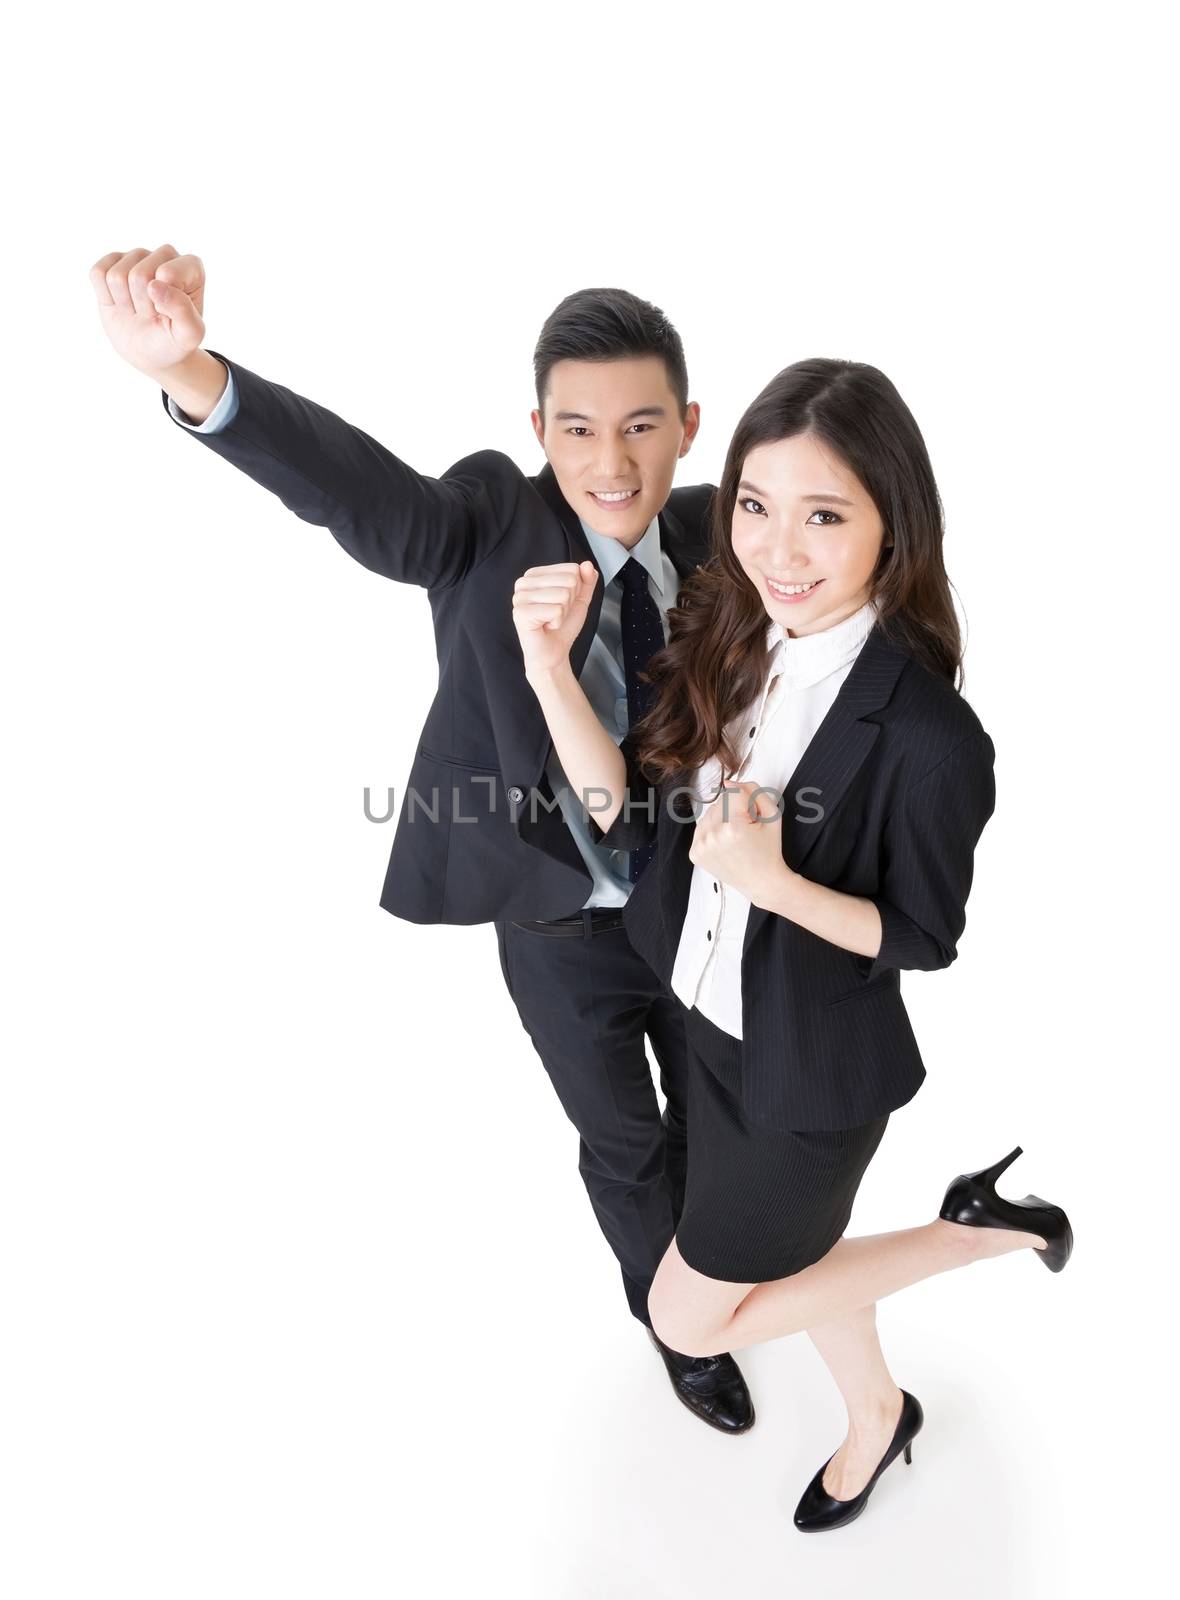 Cheerful business man and woman, full length portrait.